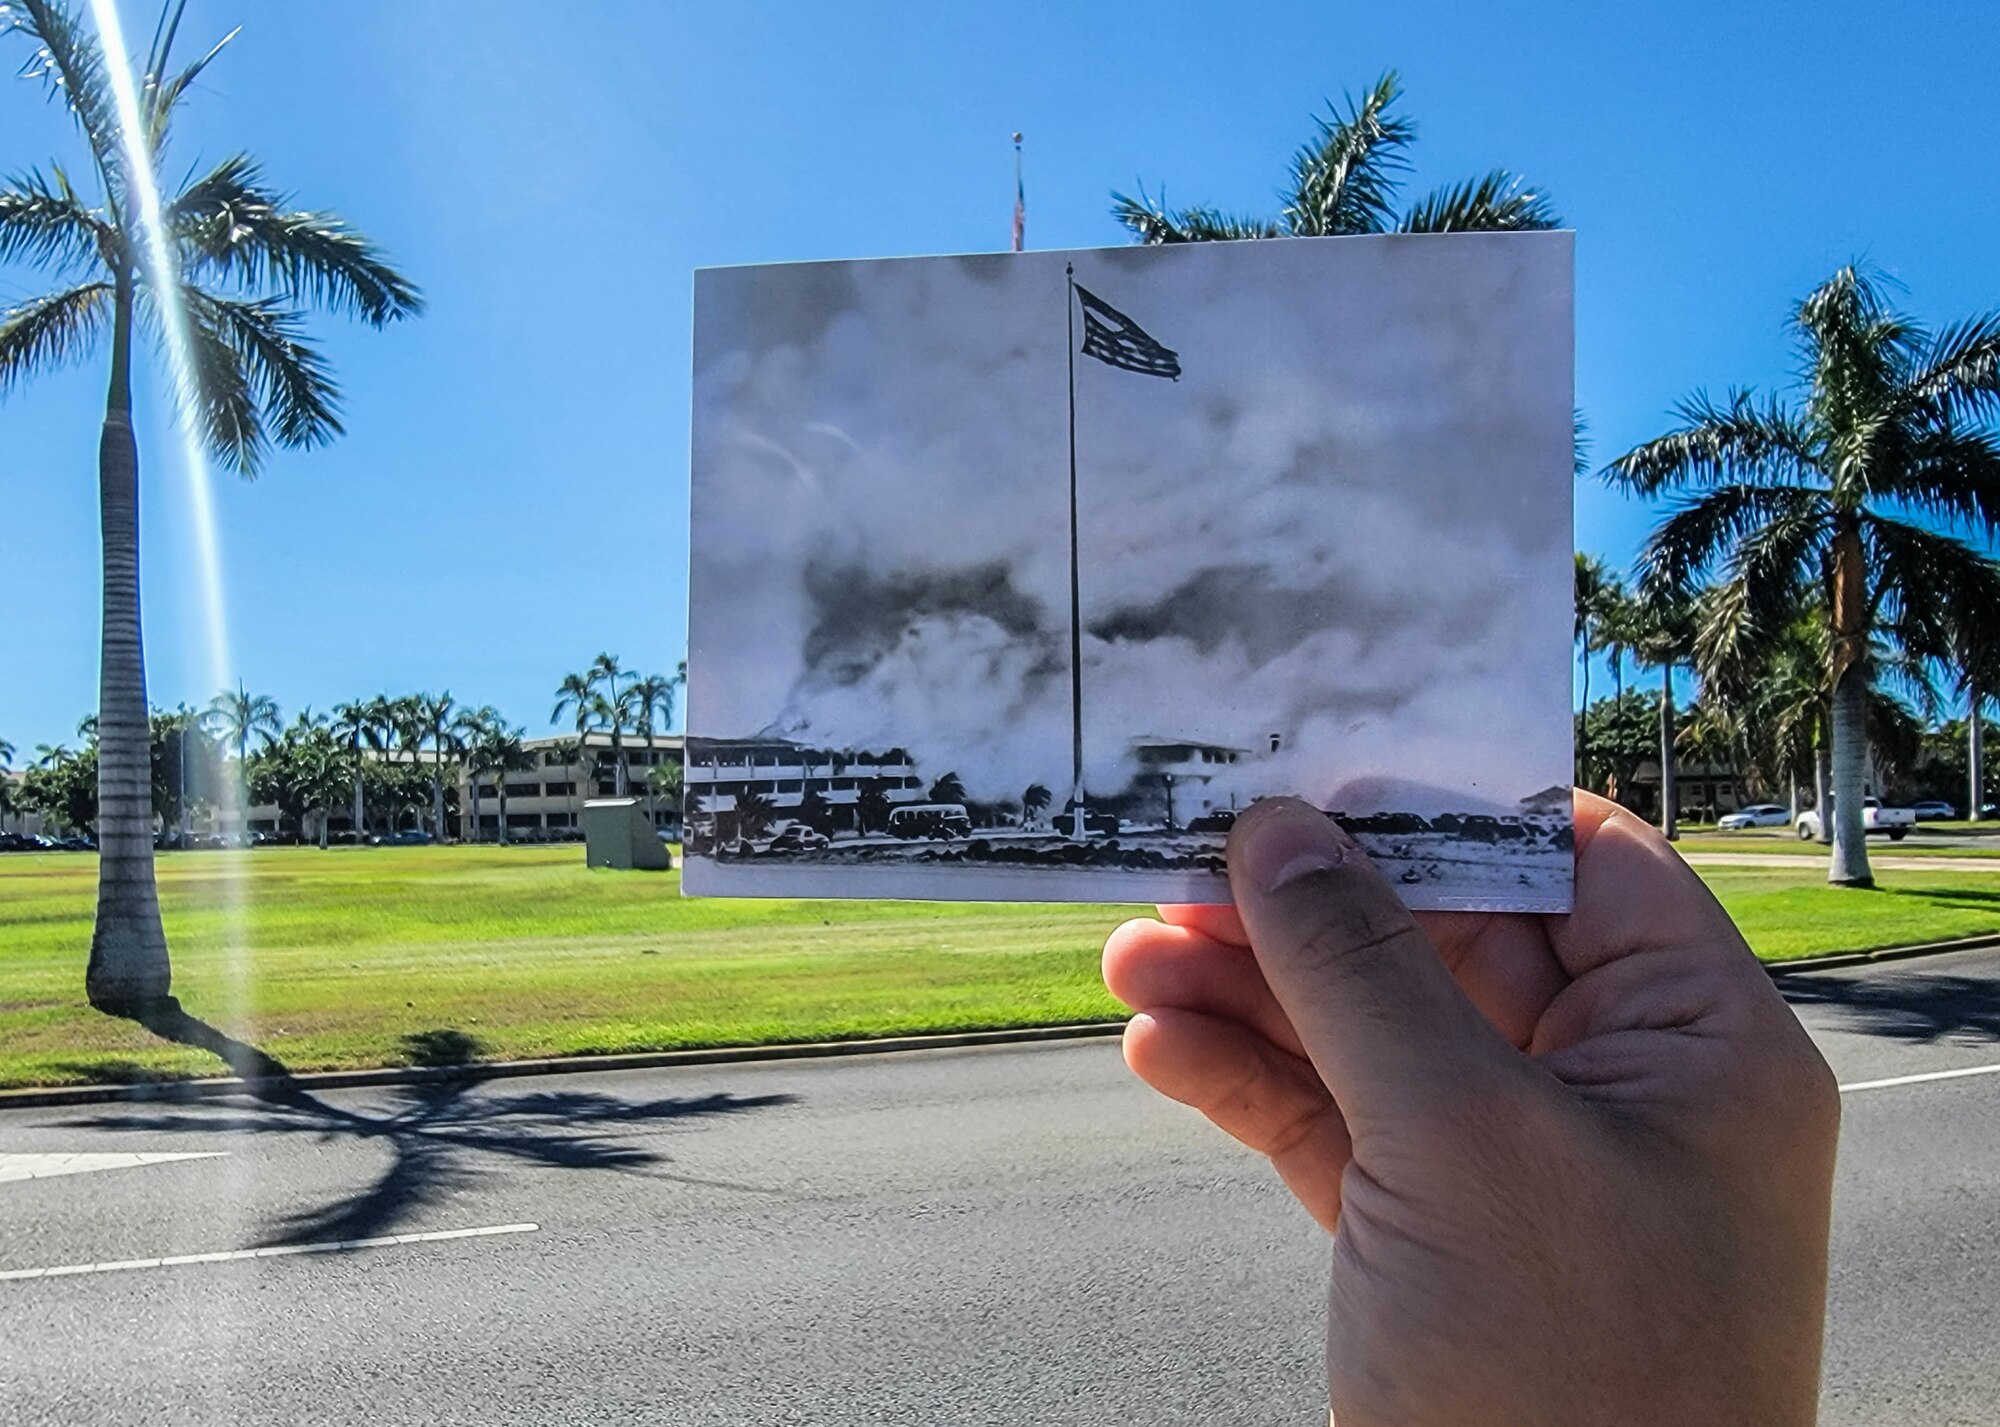 A photo of Atterbury Circle taken during the attack on Hickam Field on Dec. 7, 1941, is compared to the current state of the traffic circle at Joint Base Pearl Harbor-Hickam, Hawaii, Nov. 10, 2021. On a Sunday morning 80 years ago, the largest airborne attack force ever assembled by the Imperial Japanese Navy struck Oahu's military installations. In all, 189 men died, 303 were wounded and nearly half of the aircraft stationed on Hickam were rendered useless. (U.S. Air Force photo by Staff Sgt. Alan Ricker)